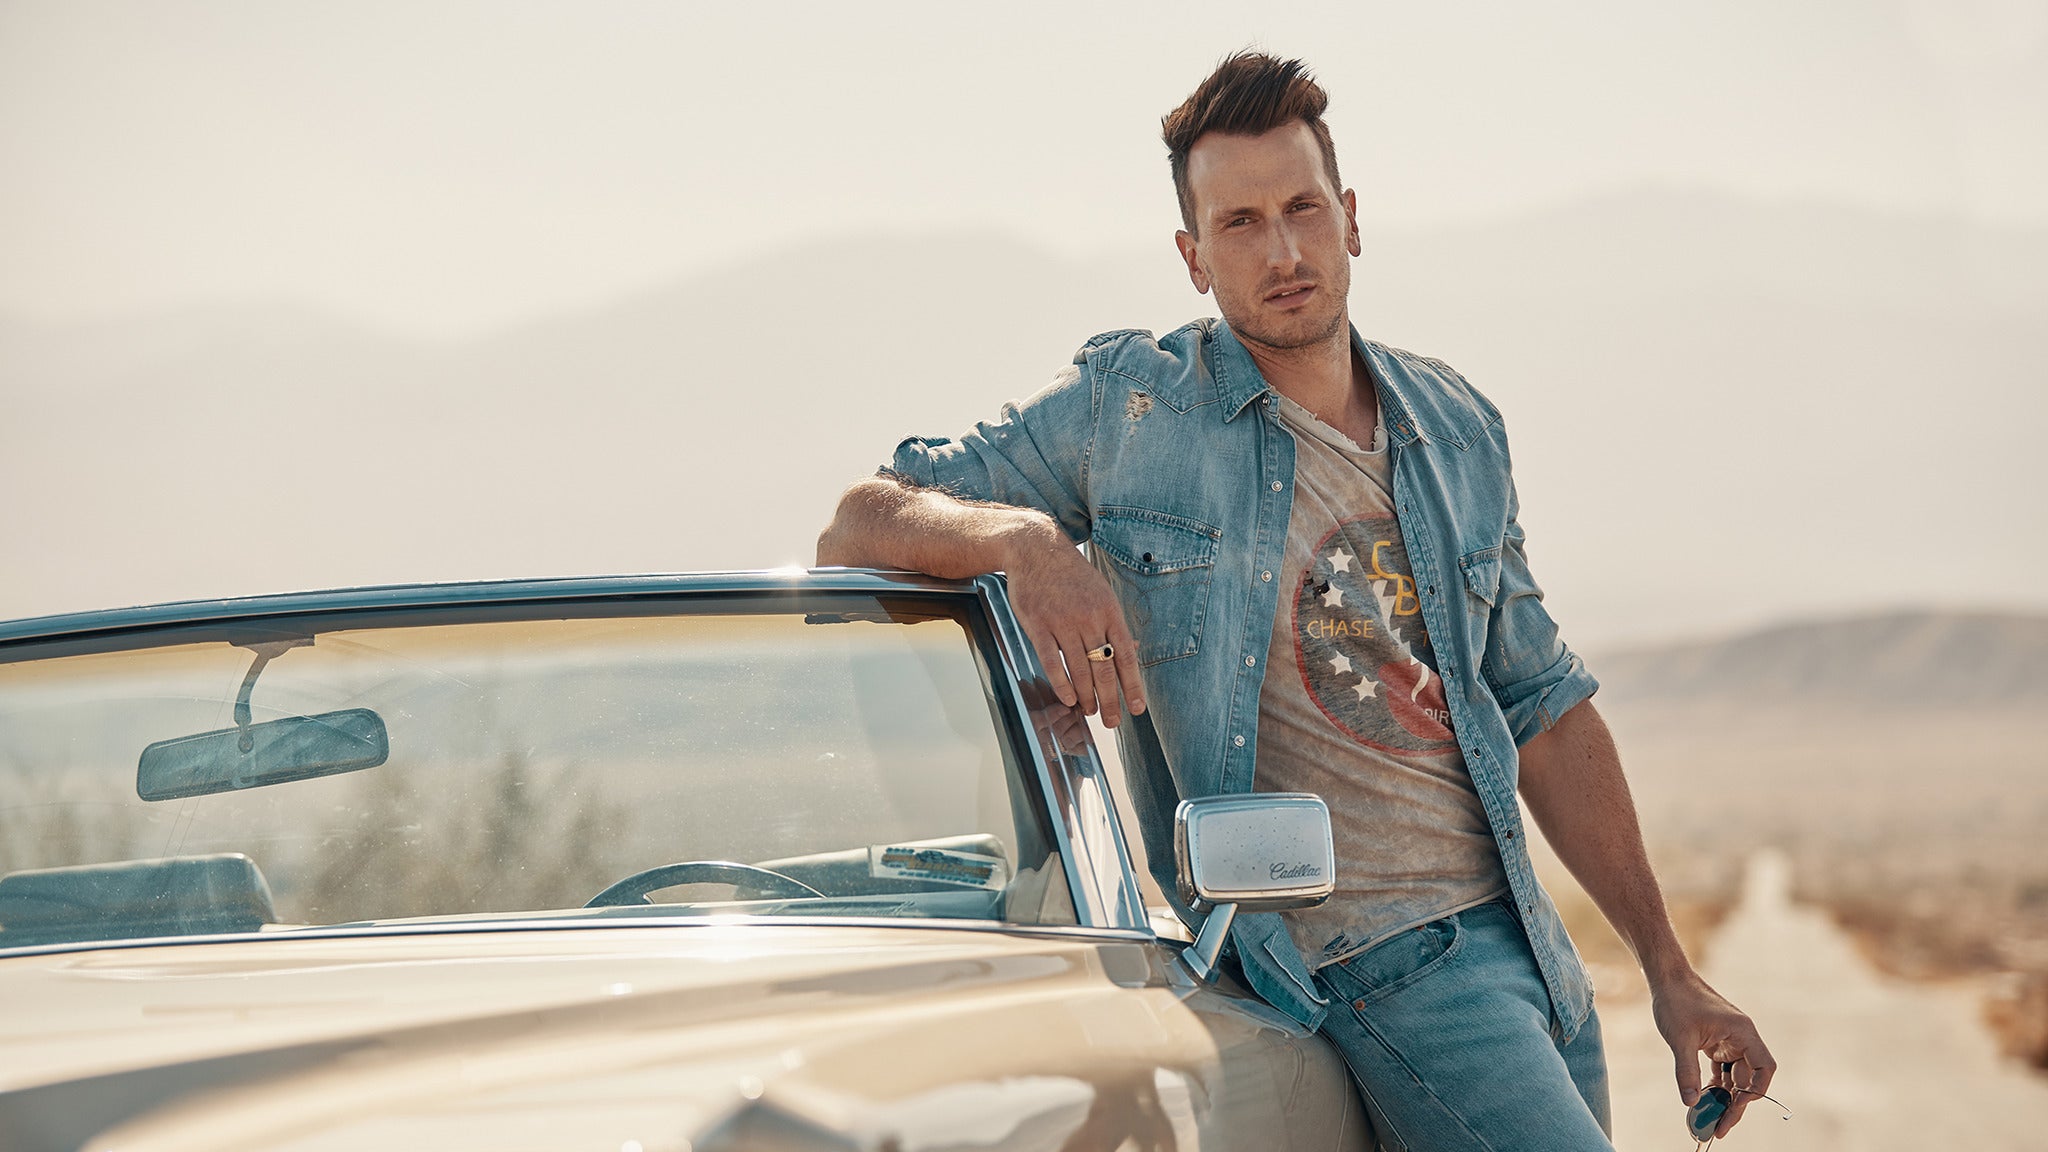 Russell Dickerson presale password for legit tickets in Chesterfield